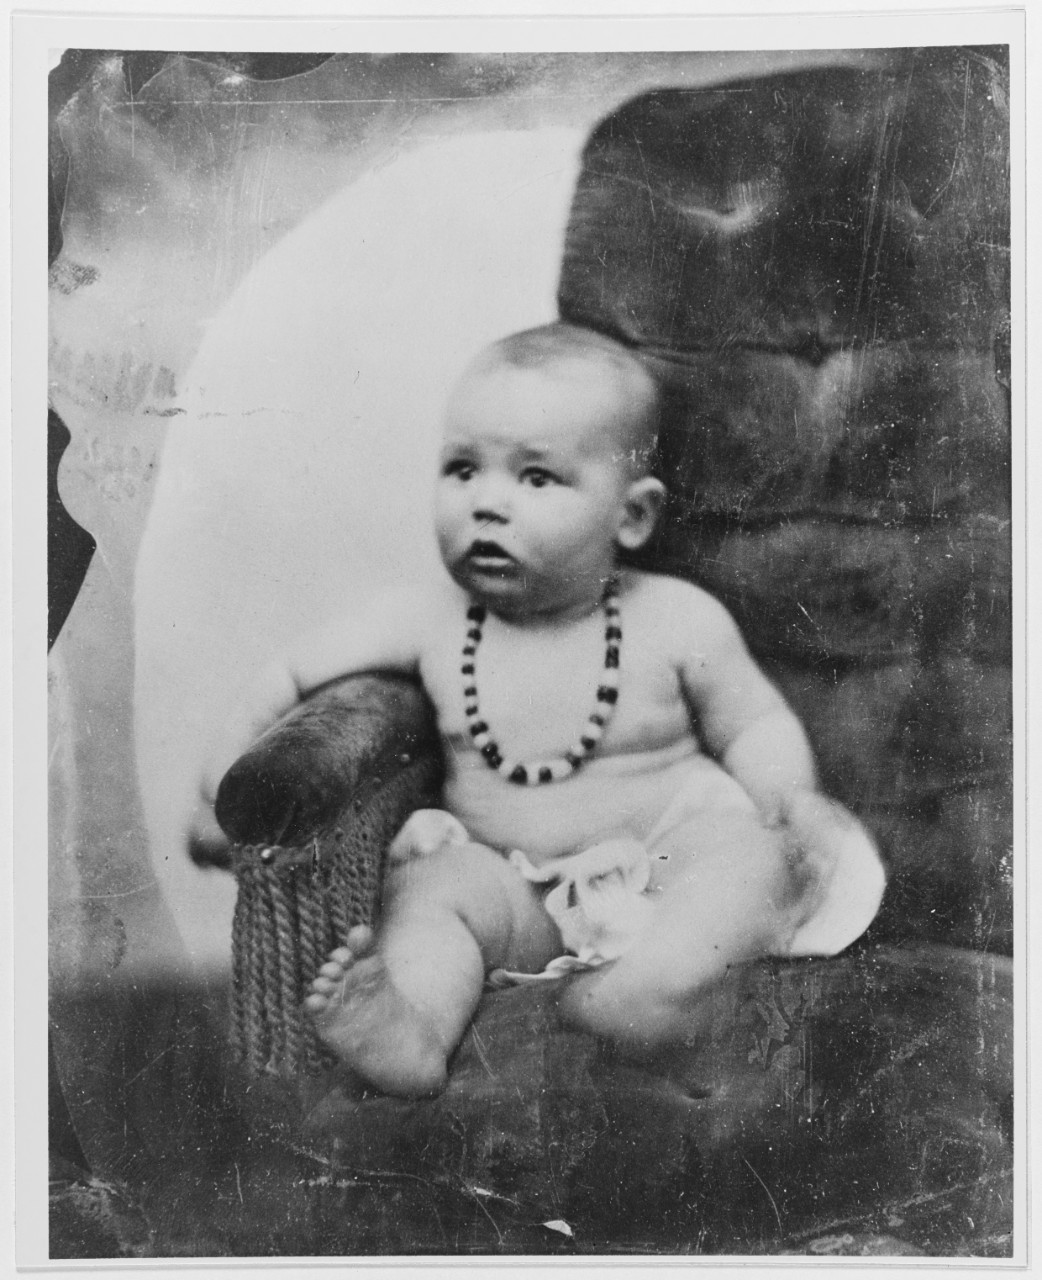 William D. Leahy as a baby.